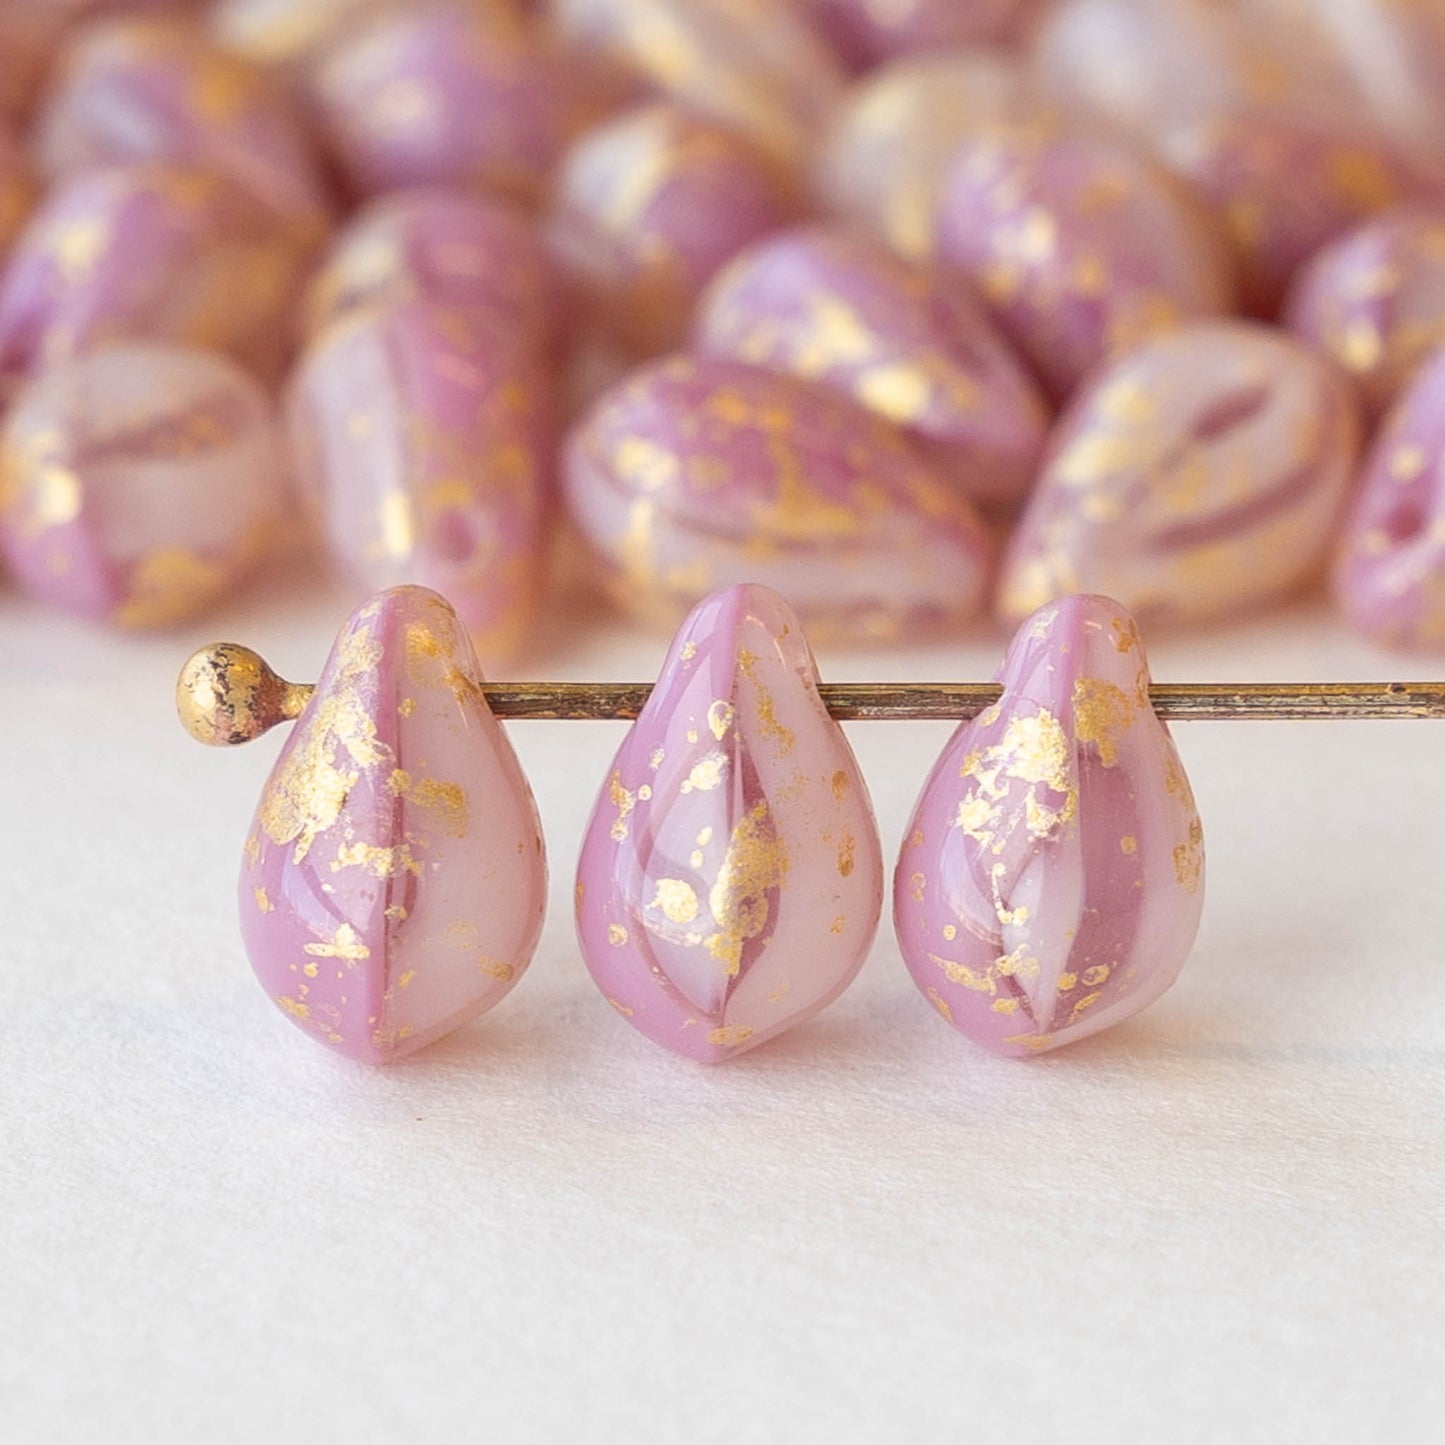 6x9mm Glass Teardrop Beads - Opaque Pink Marble with Gold - 40 Beads